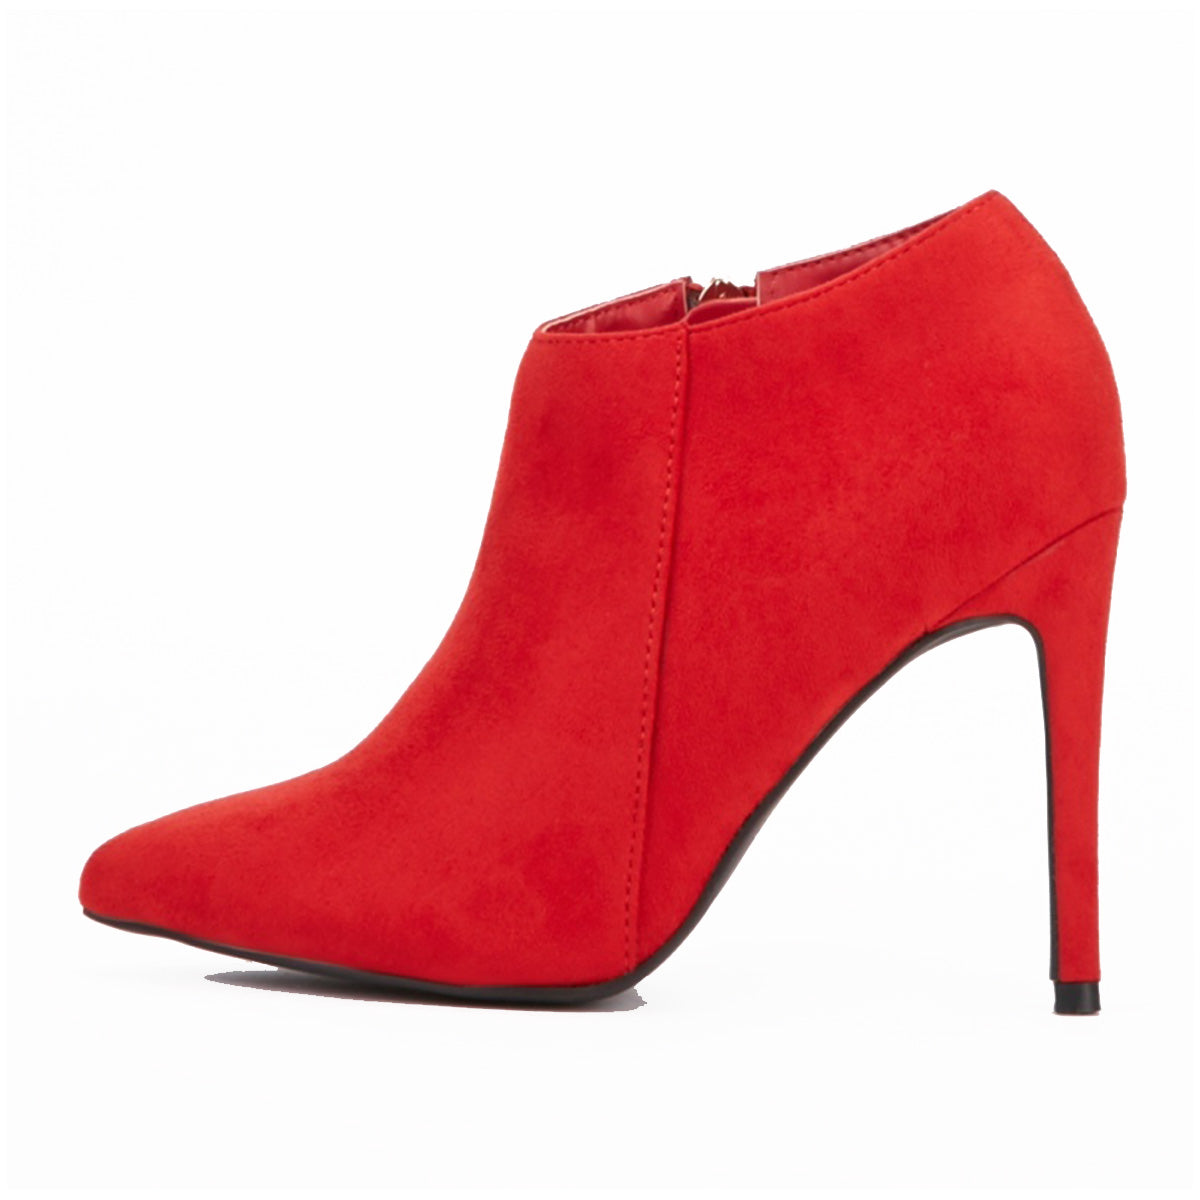 Red suedette high heel ankle boots